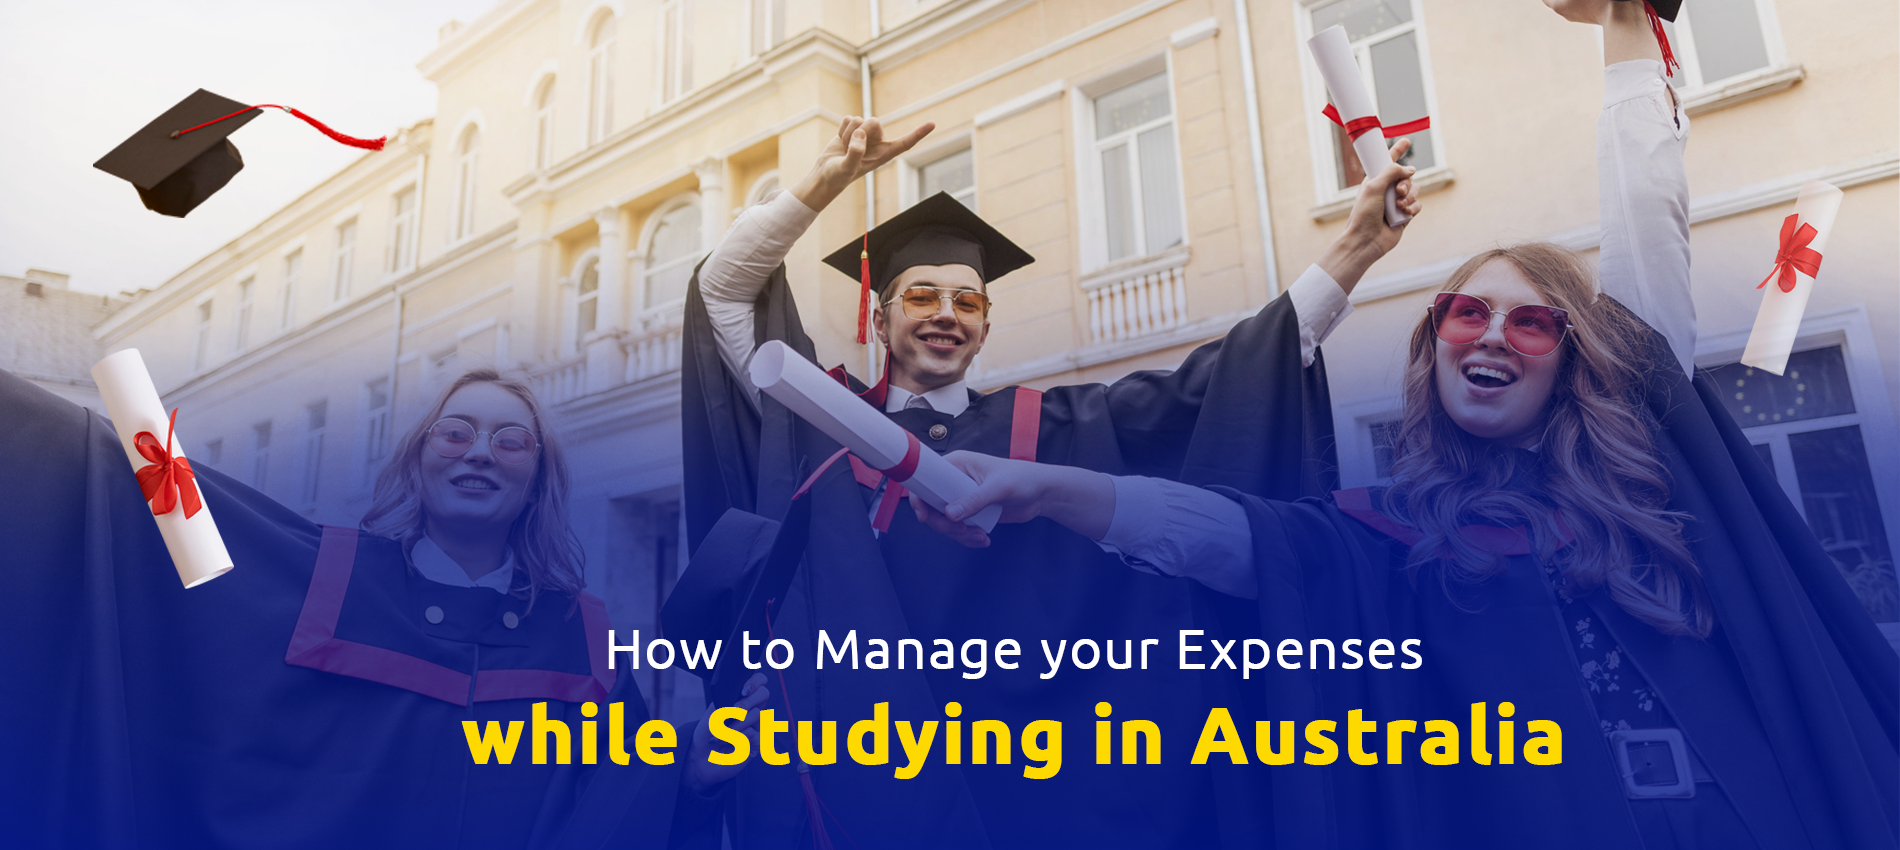 How to Manage Your Expenses While Studying in Australia?